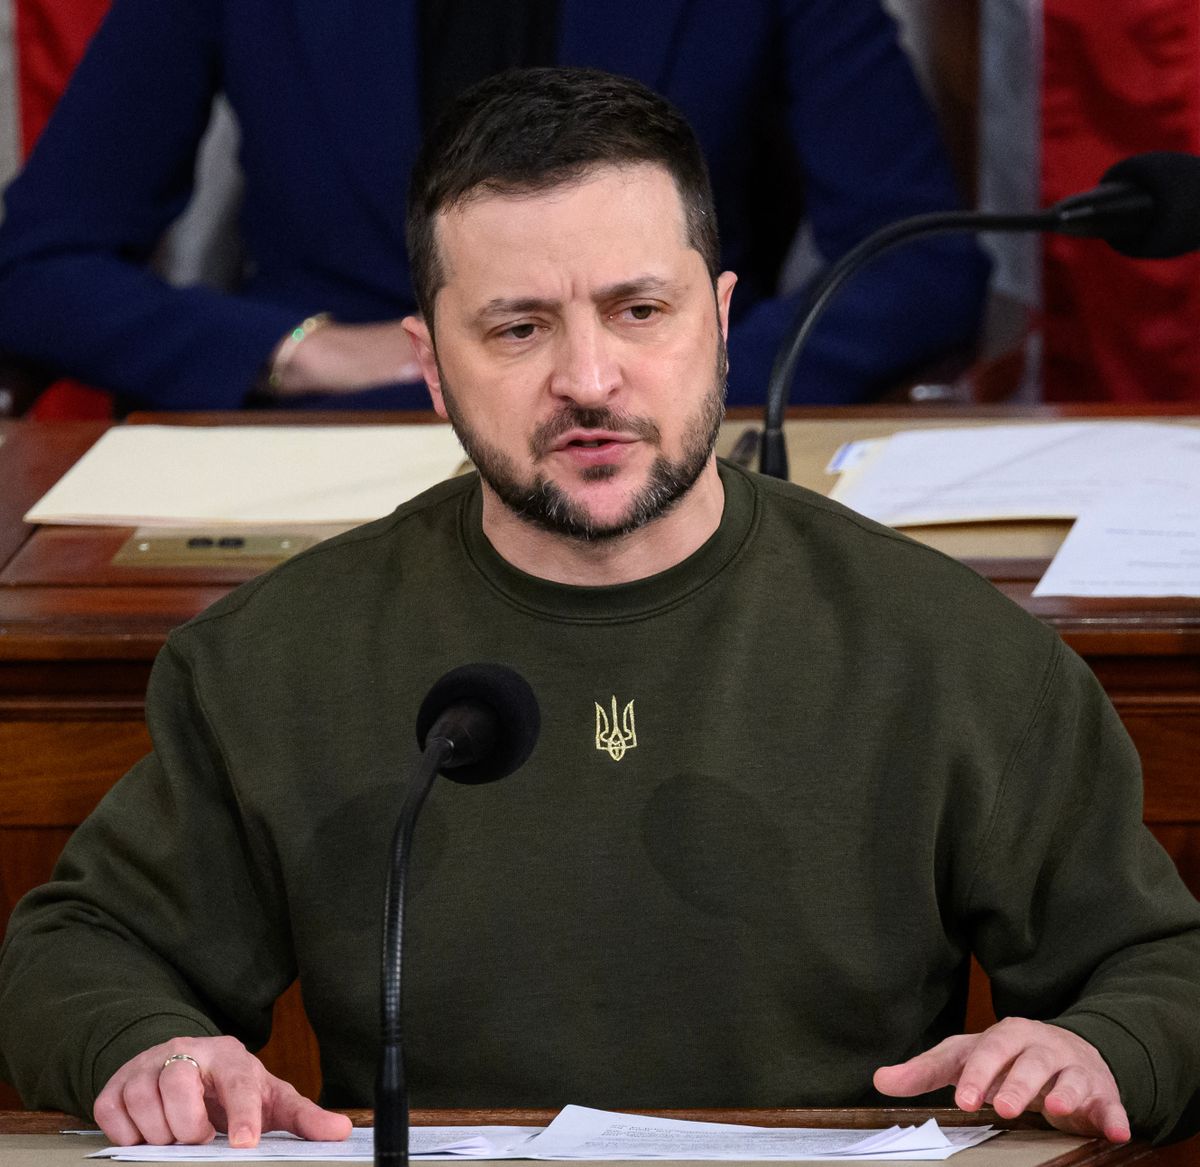 Ukraine's President Volodymyr Zelensky addresses the US Congress at the US Capitol in Washington, DC on December 21, 2022. - Zelensky is in Washington to meet with US President Joe Biden and address Congress -- his first trip abroad since Russia invaded in February.